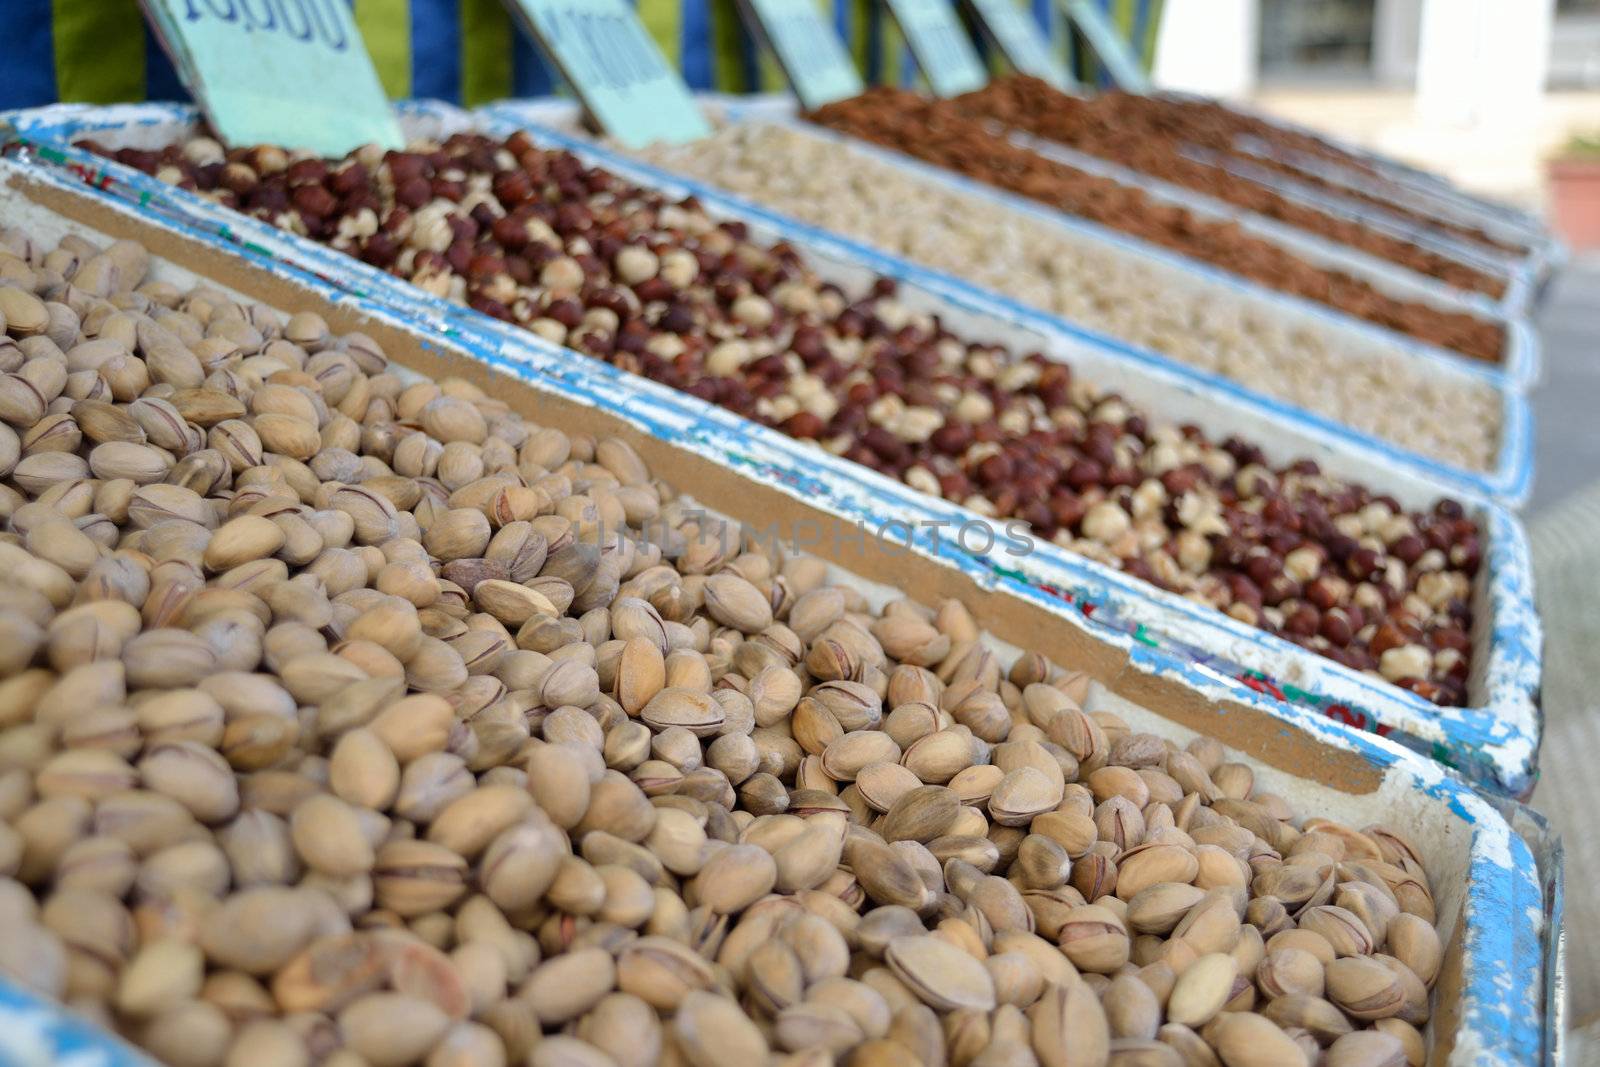 Pistachios and other nuts at tunisian market